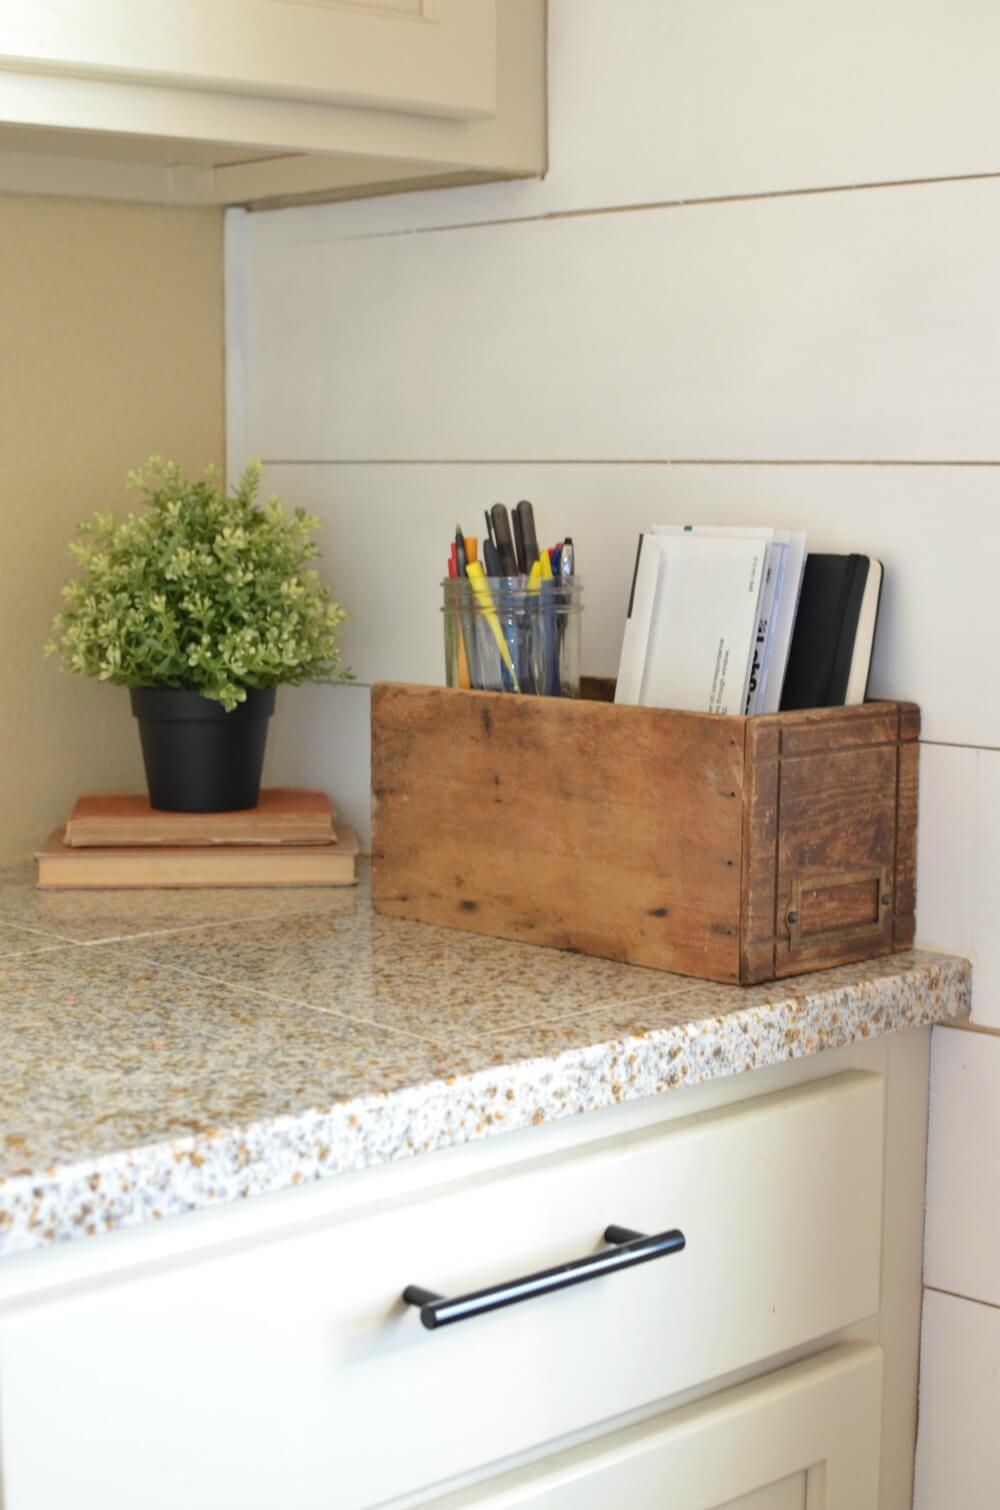 wooden vintage mail organizer on granite countertop with greenery in background